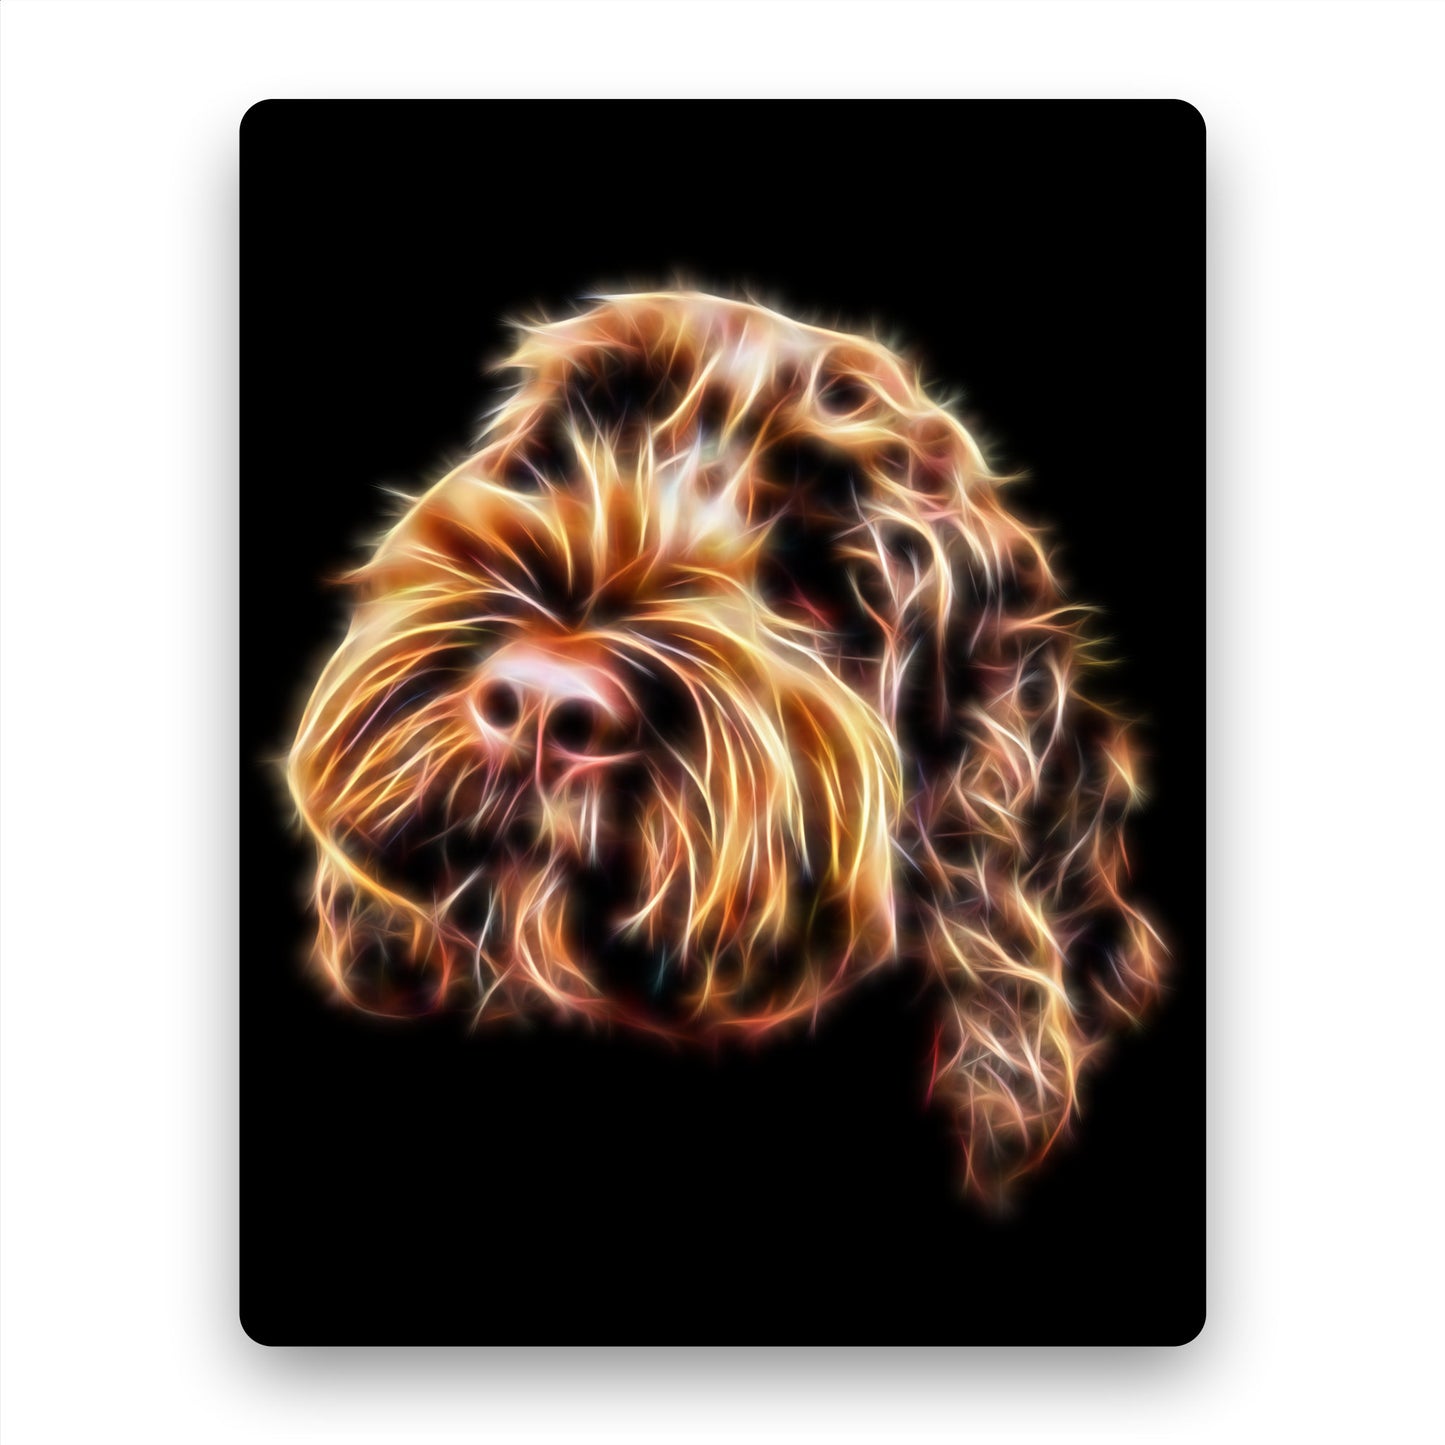 Chocolate Cockapoo Metal Wall Plaque with Stunning Fractal Art Design. Perfect Gift for Cockapoo Owner.